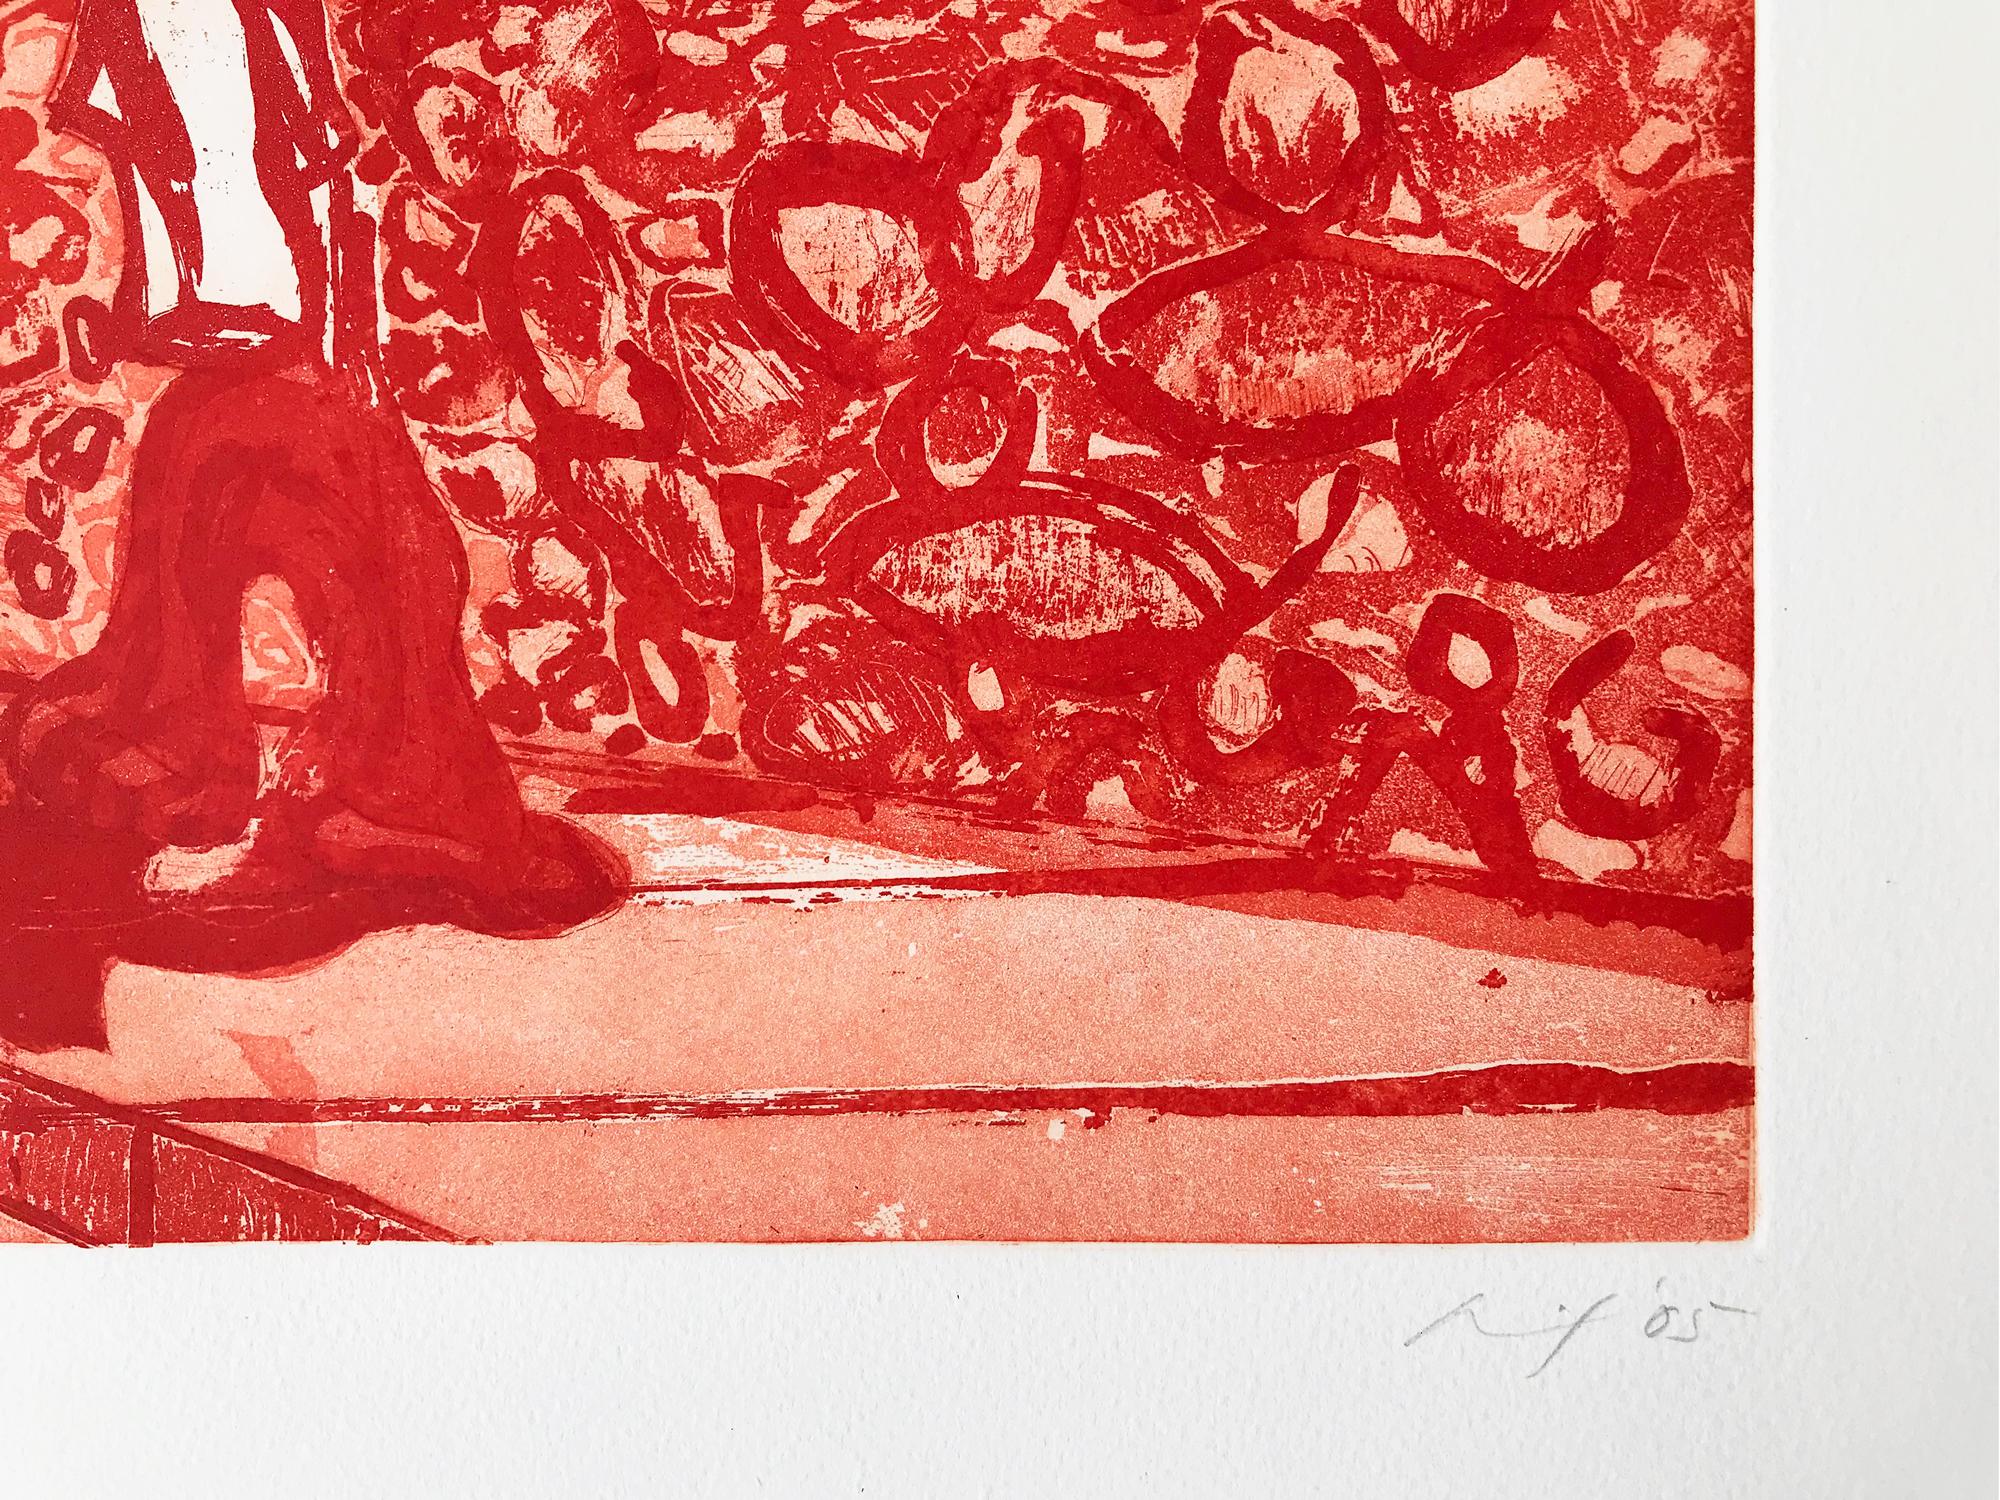 Peter Doig (born 1959 in Edinburgh)
Lapeyrouse Wall, 2005
Medium: Etching with aquatint printed in red on wove paper, with full margins
Dimensions: 29.5 × 39.2 cm (45.4 x 56 cm)
Edition of 35: Hand-signed, dated and numbered in pencil
Condition: